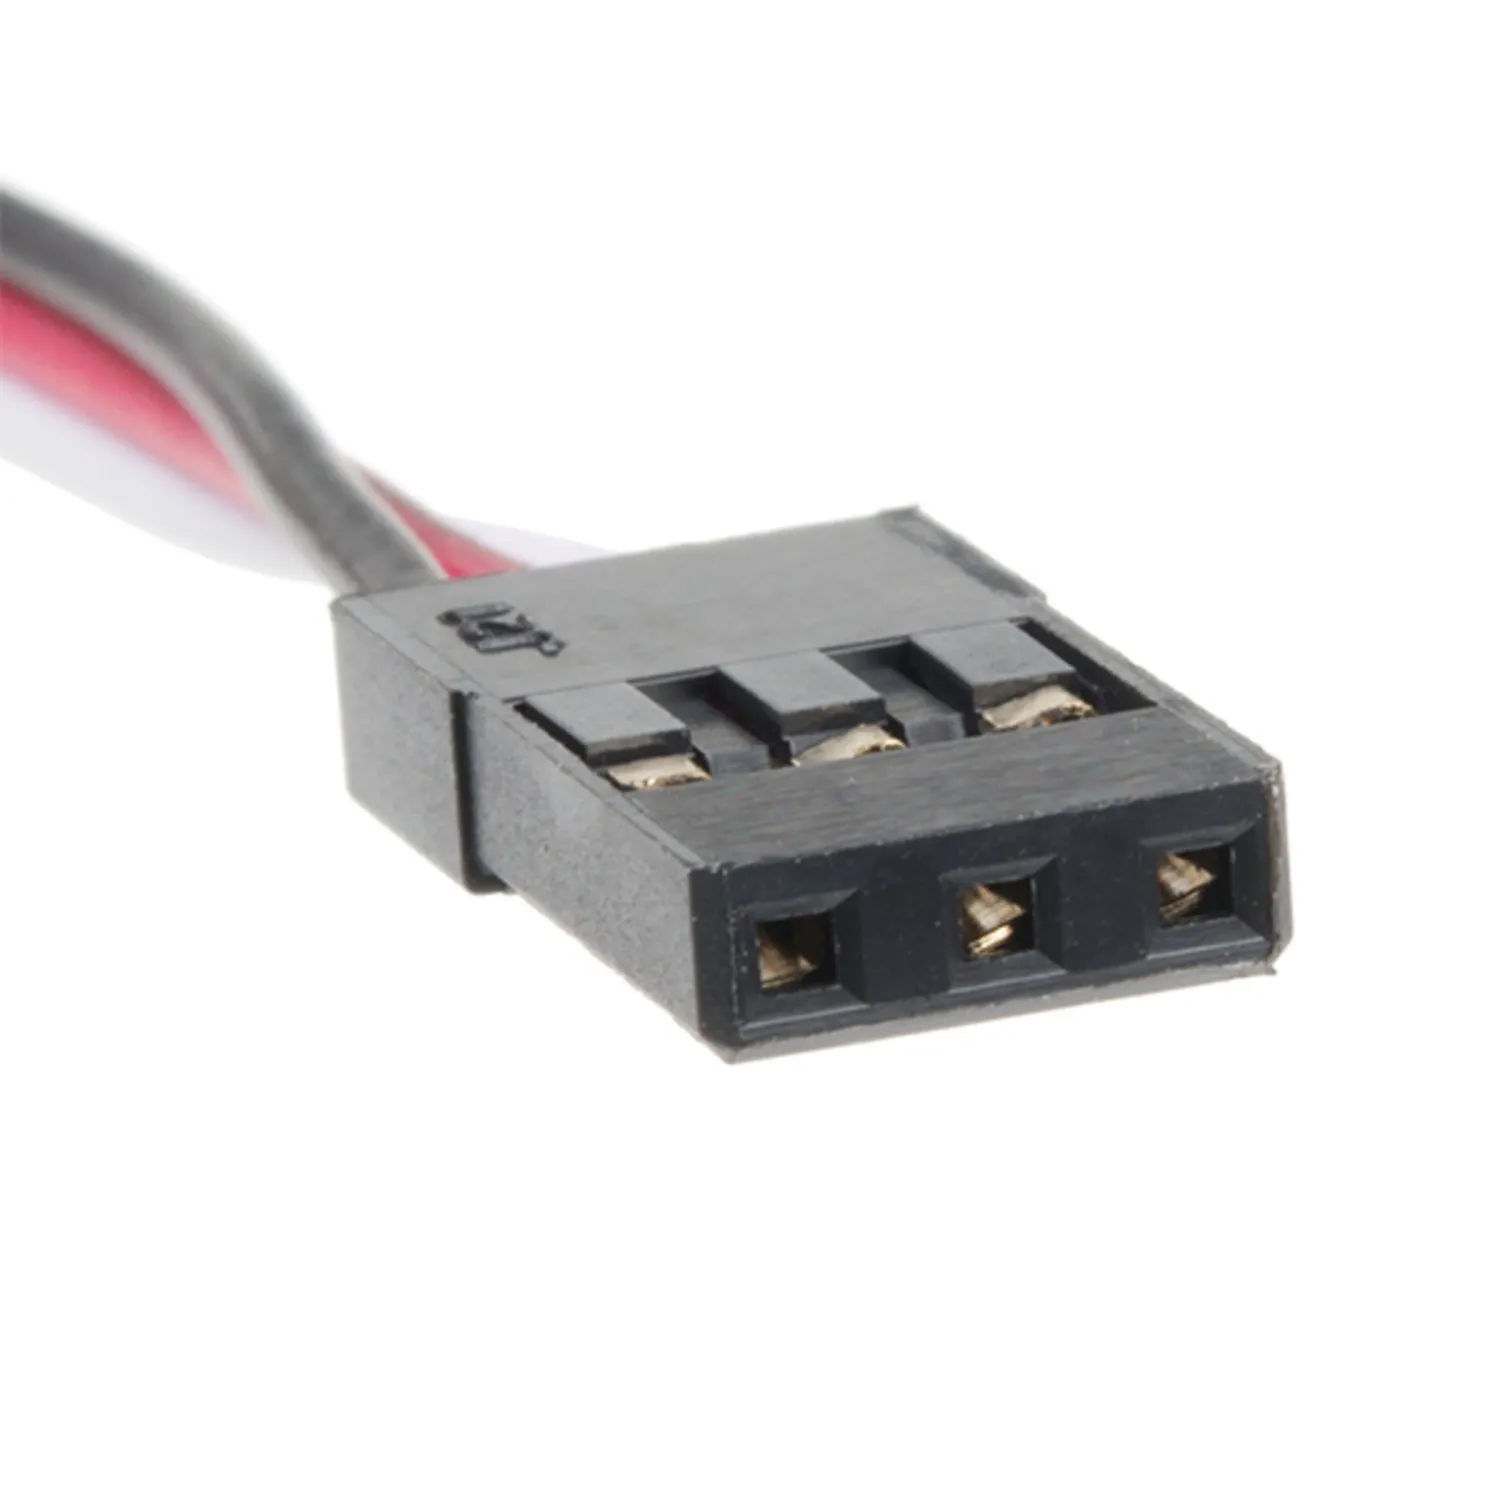 Photo of Servo Extension Cable - Female to Male (Shrouded)